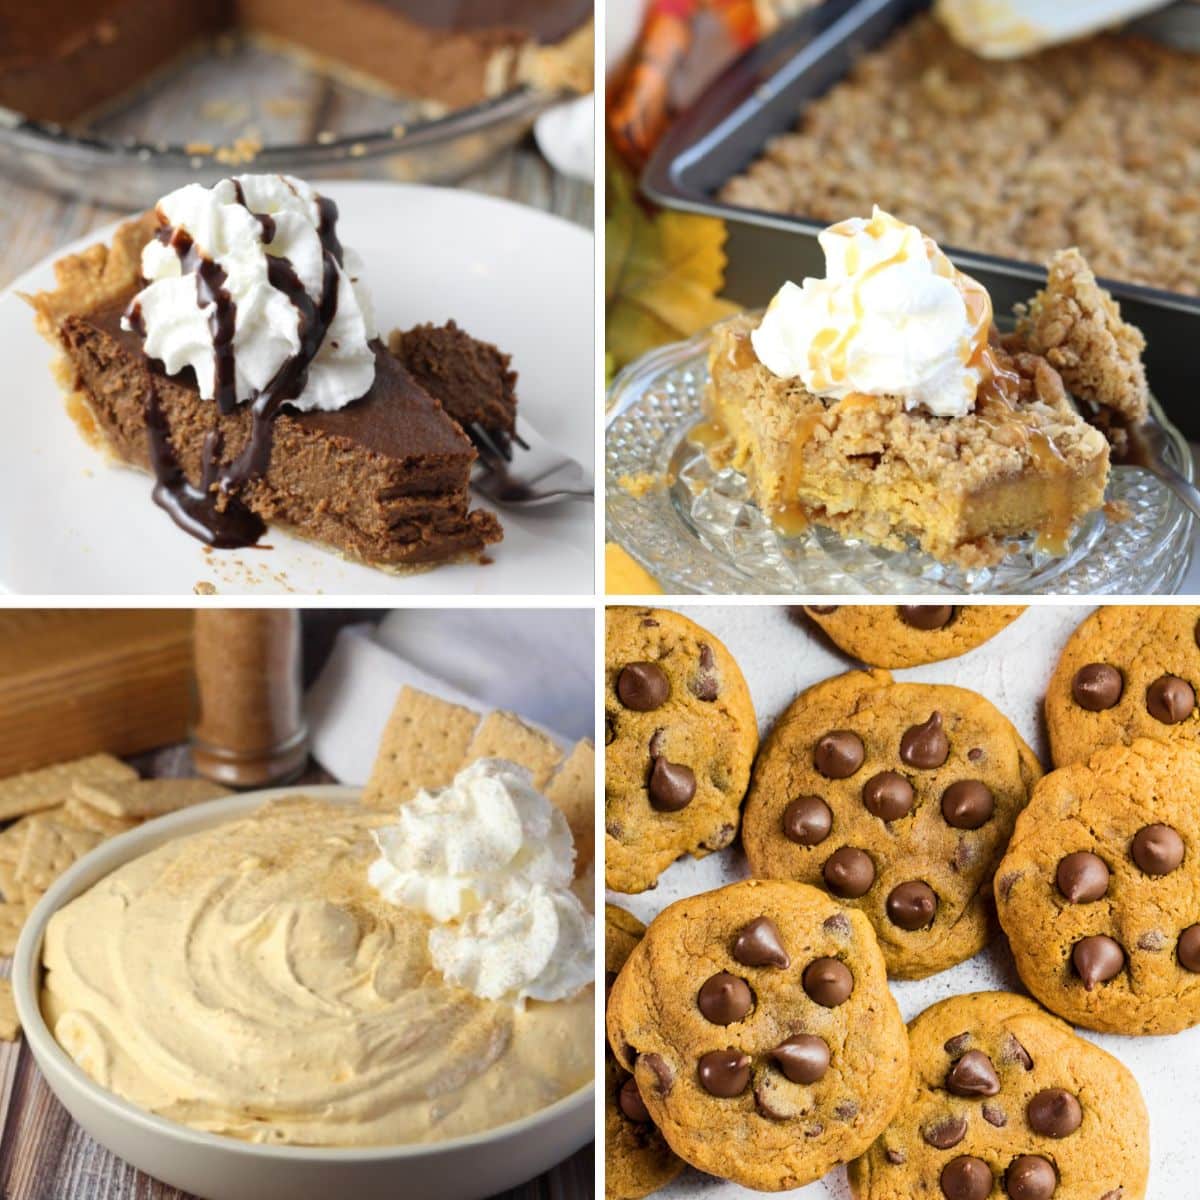 Best pumpkin pie spice dessert recipes to bake featuring four tasty sweets in a collage image.